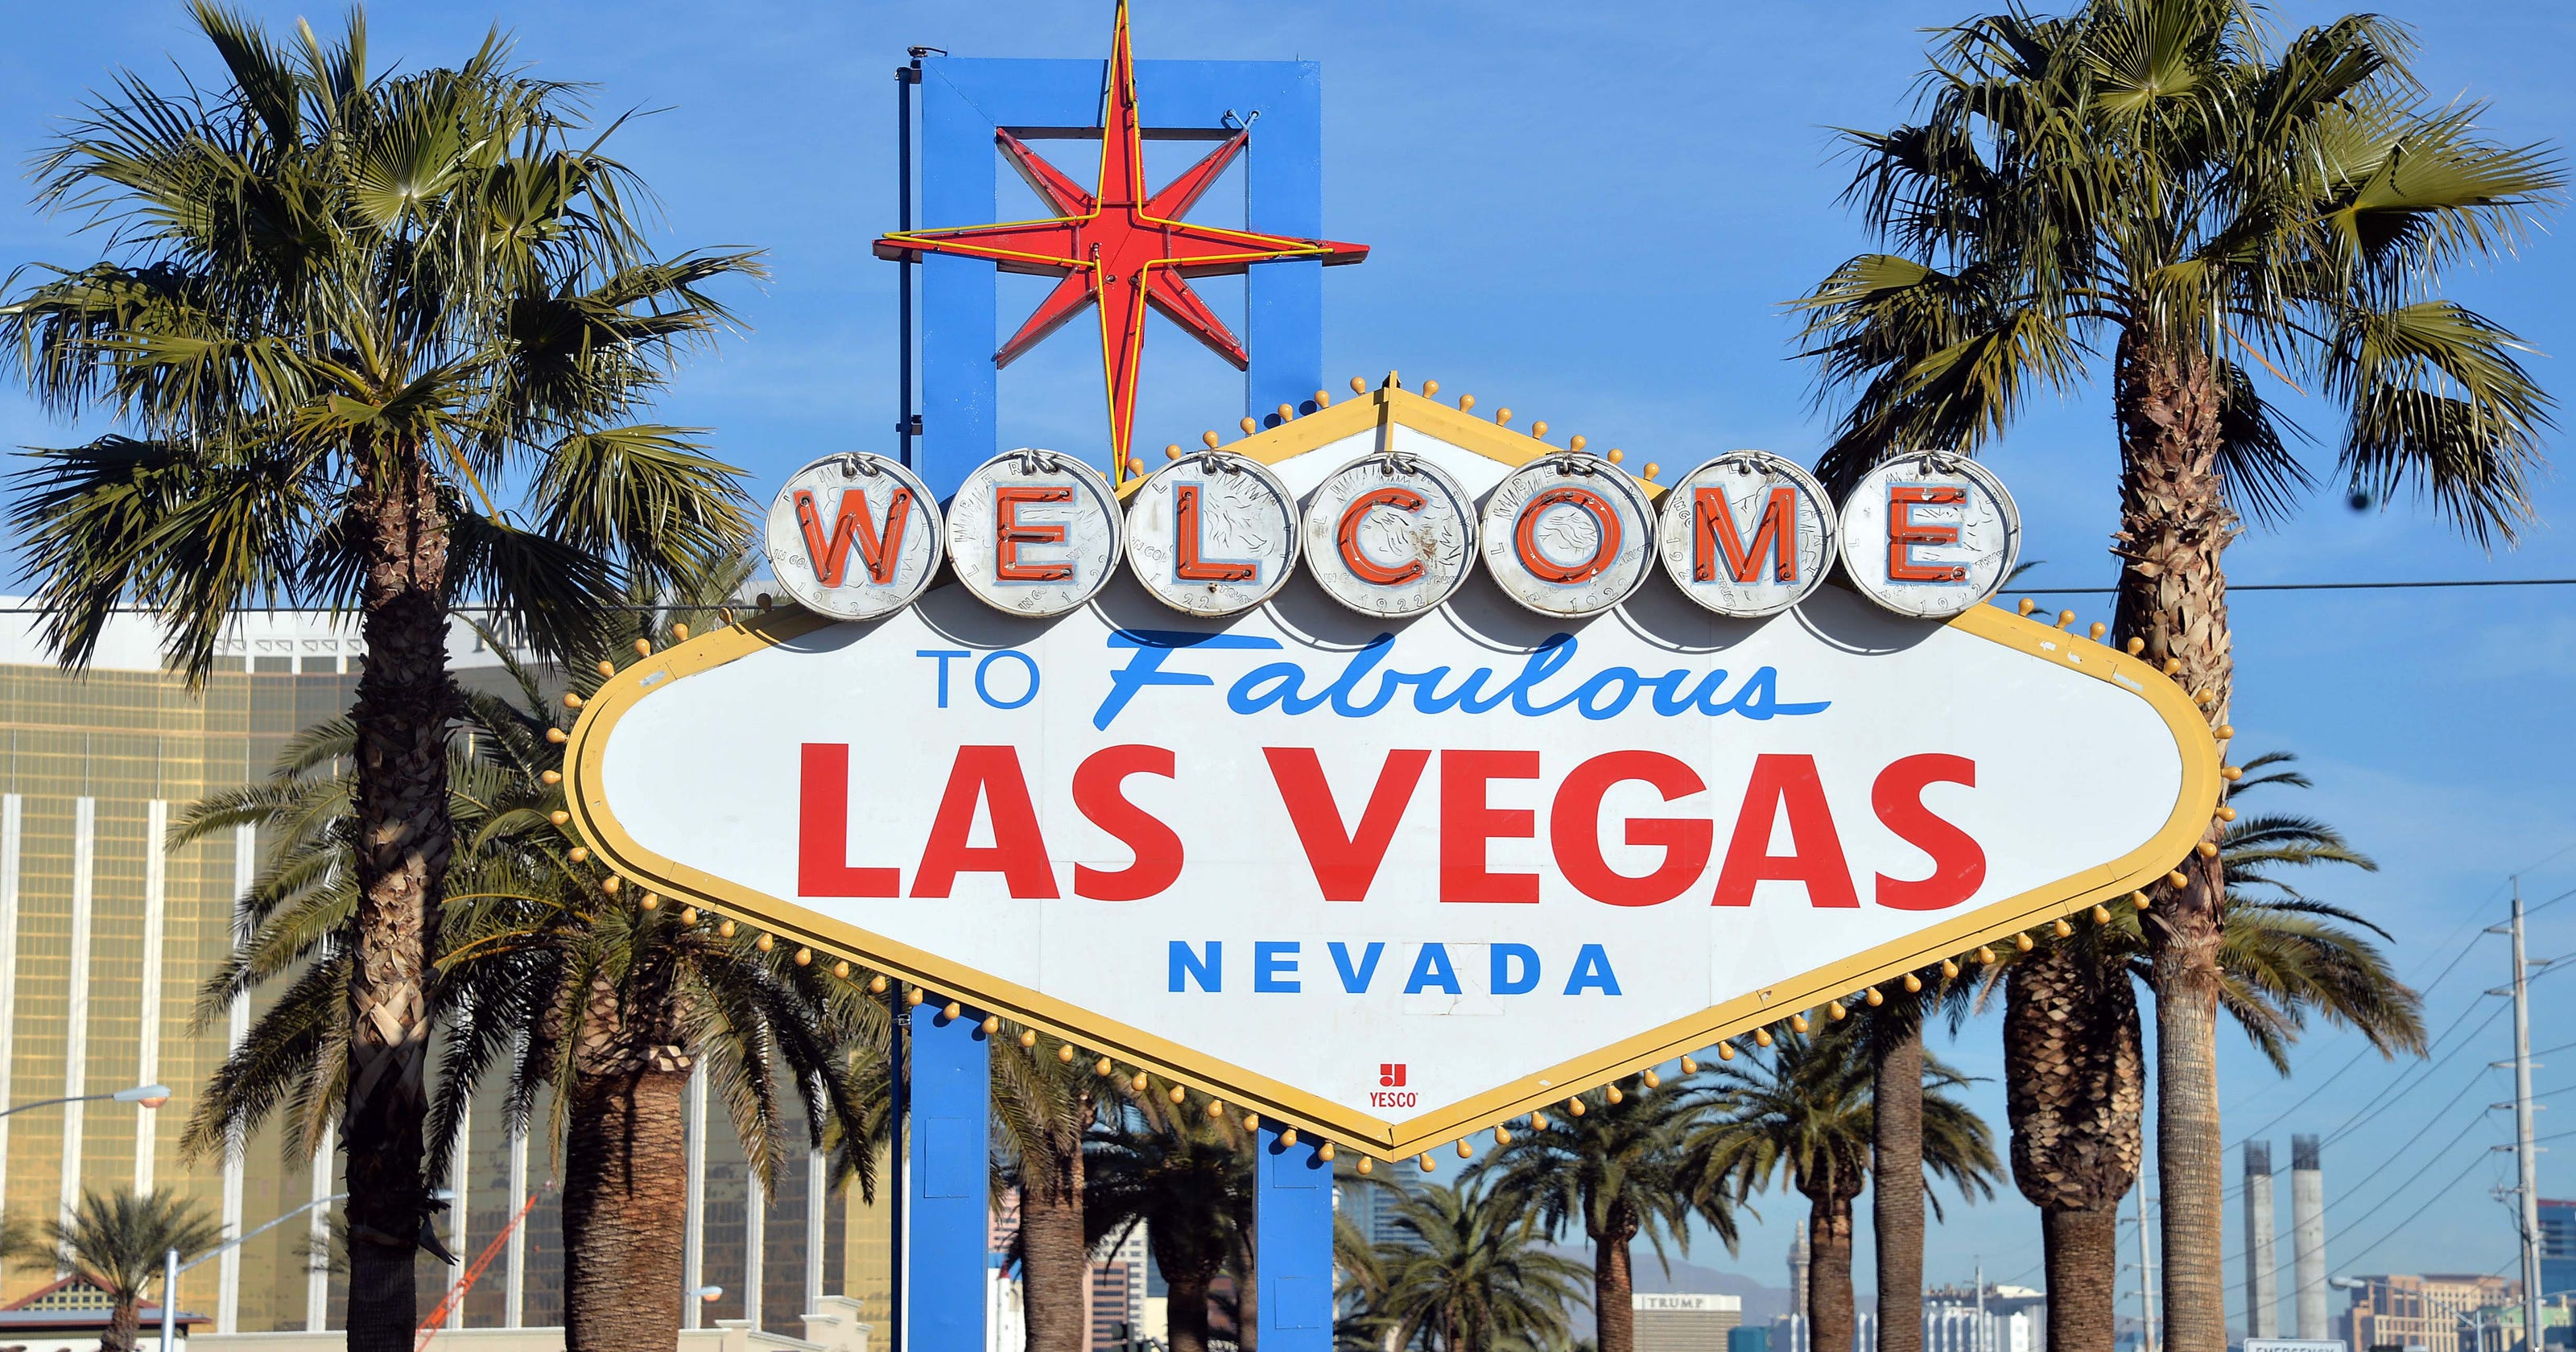 Las Vegas Cheap and free things to do and where to find deals